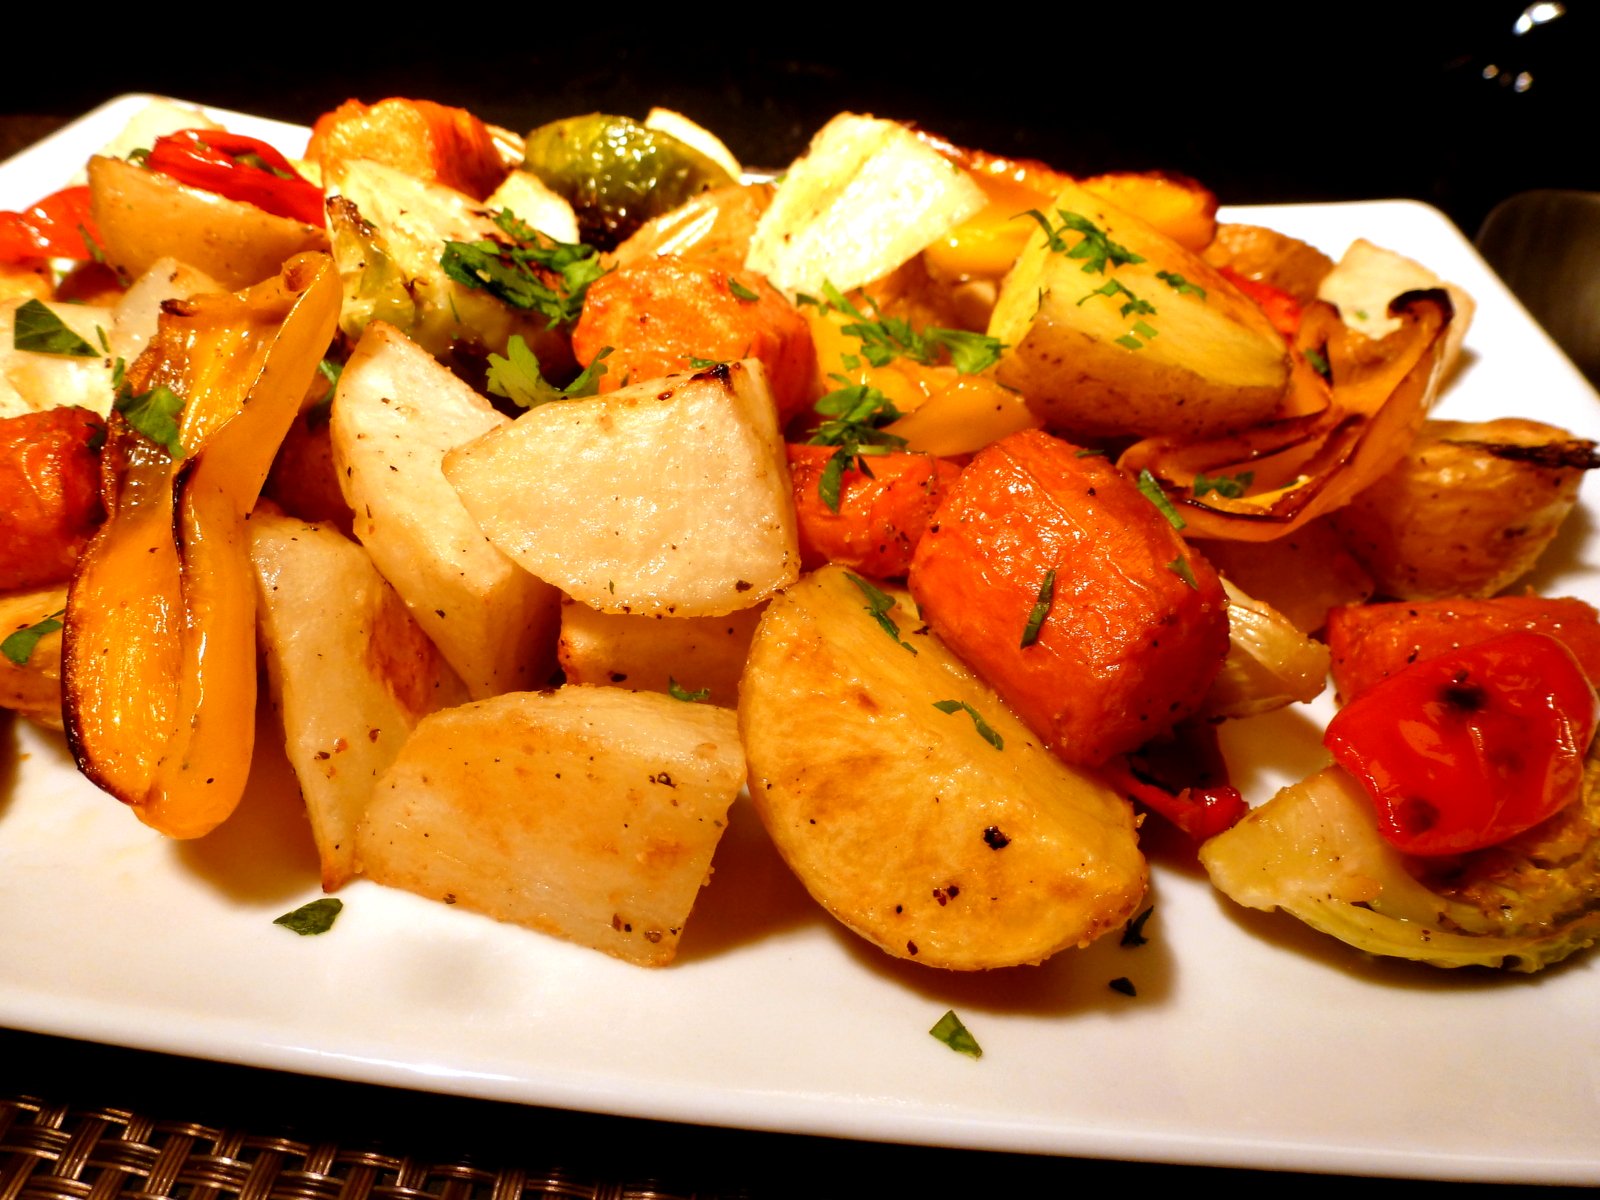 Roasted mixed vegetables are easy to prepare and can be served hot or cold.